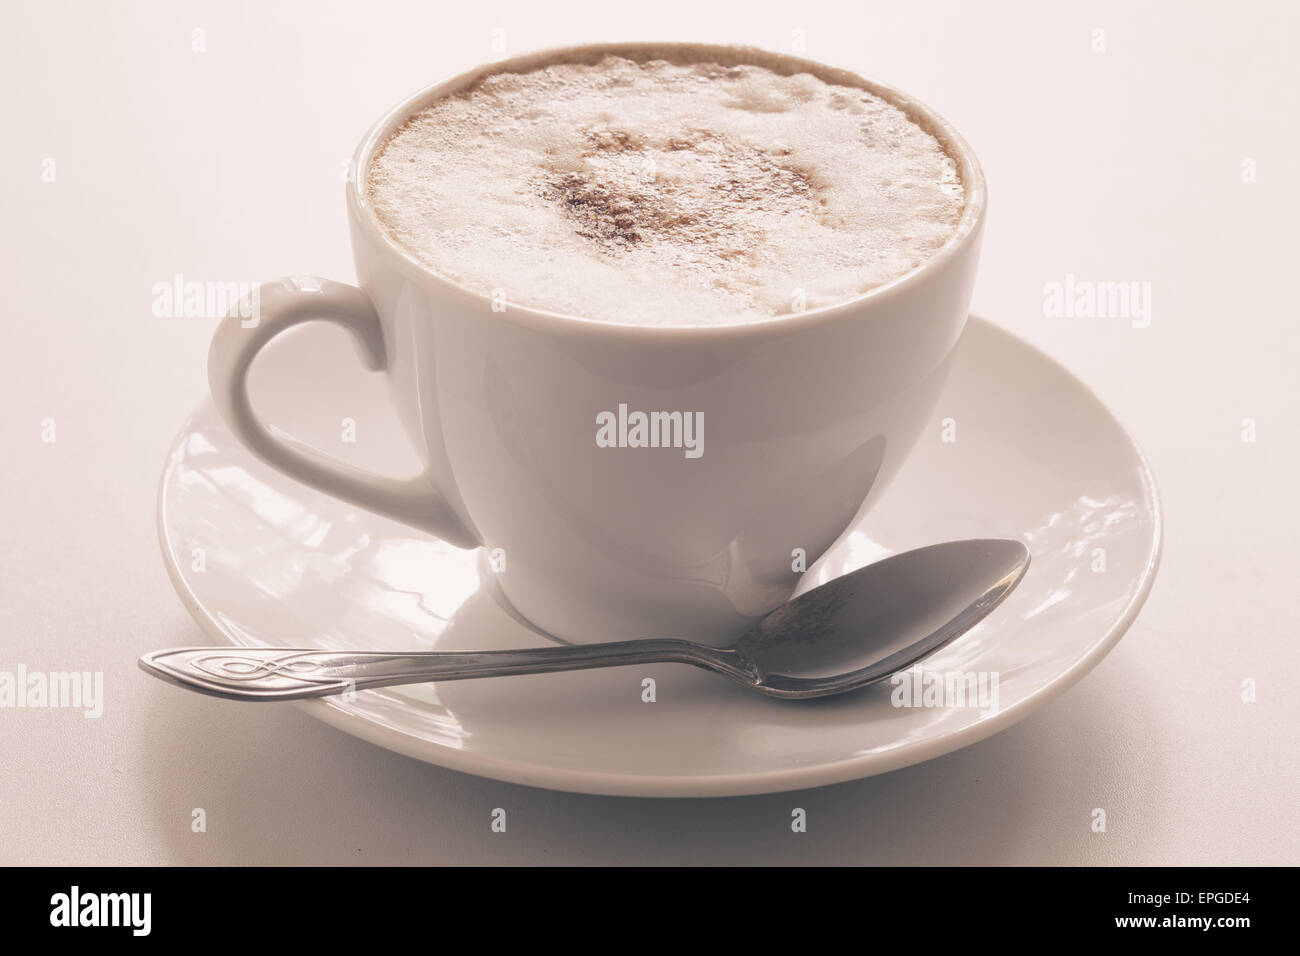 Cappuccino cup Stock Photo